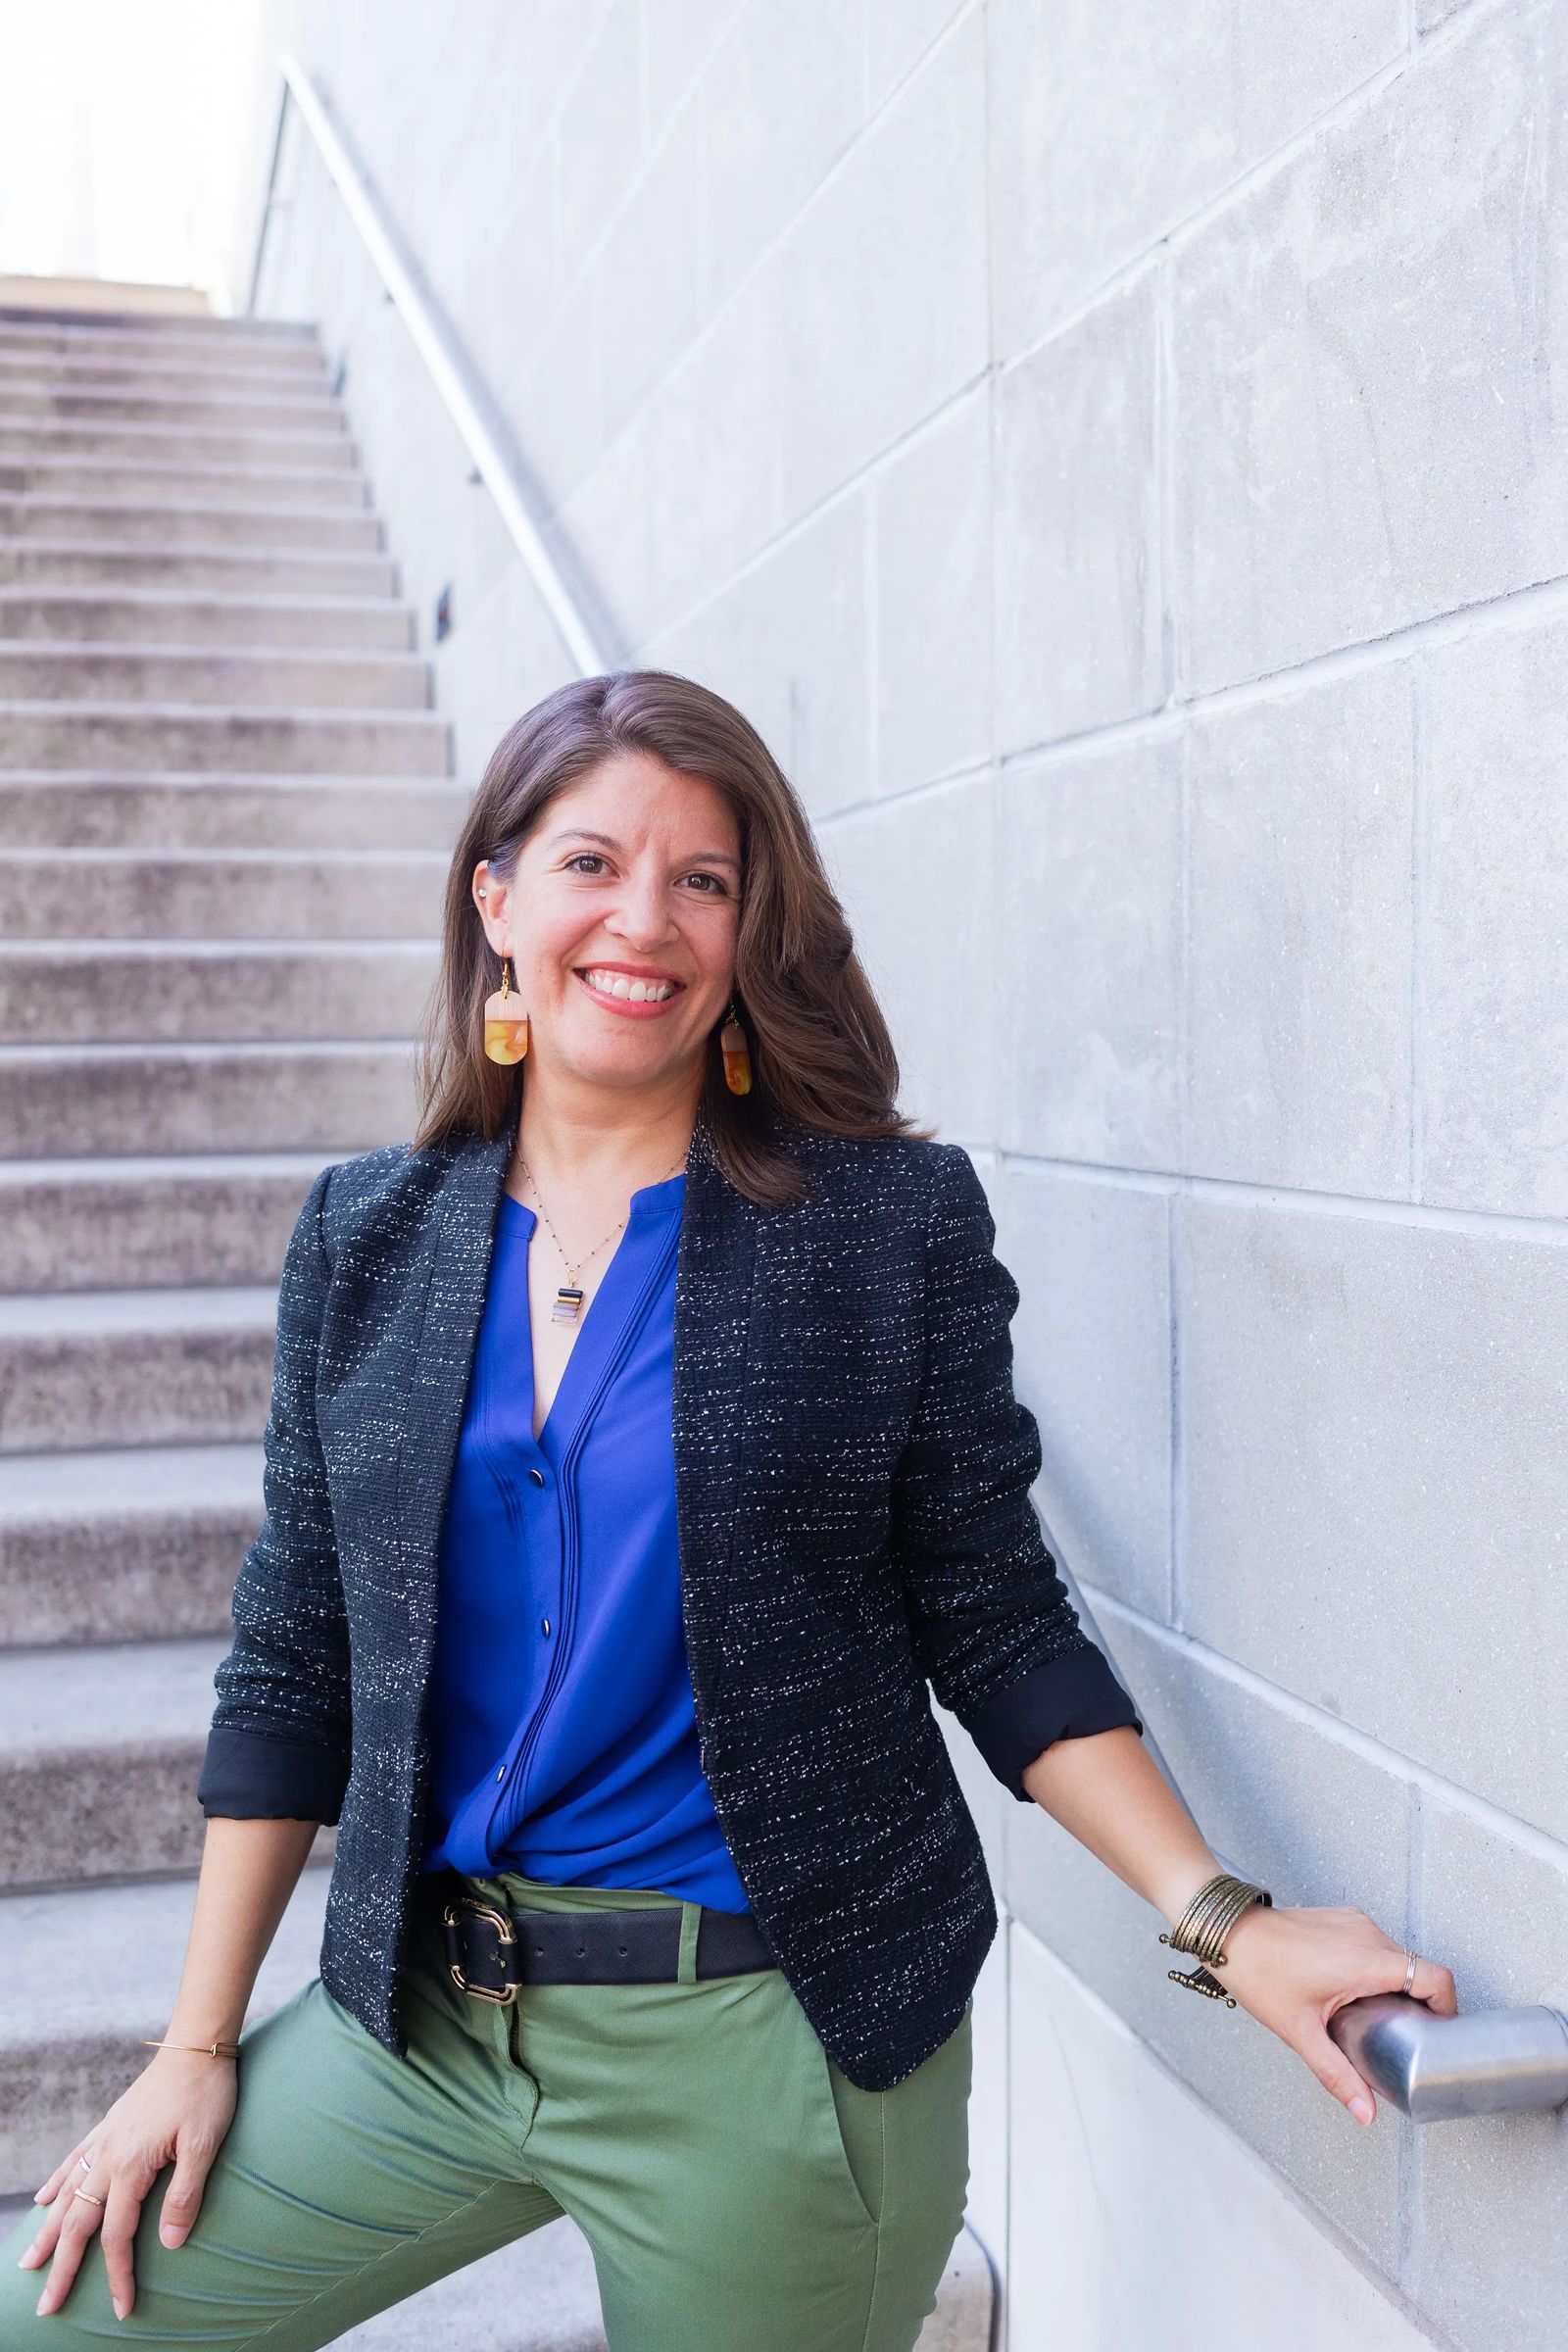 Fair skinned latina wear a black blazer and blue top standing on a concrete staircase